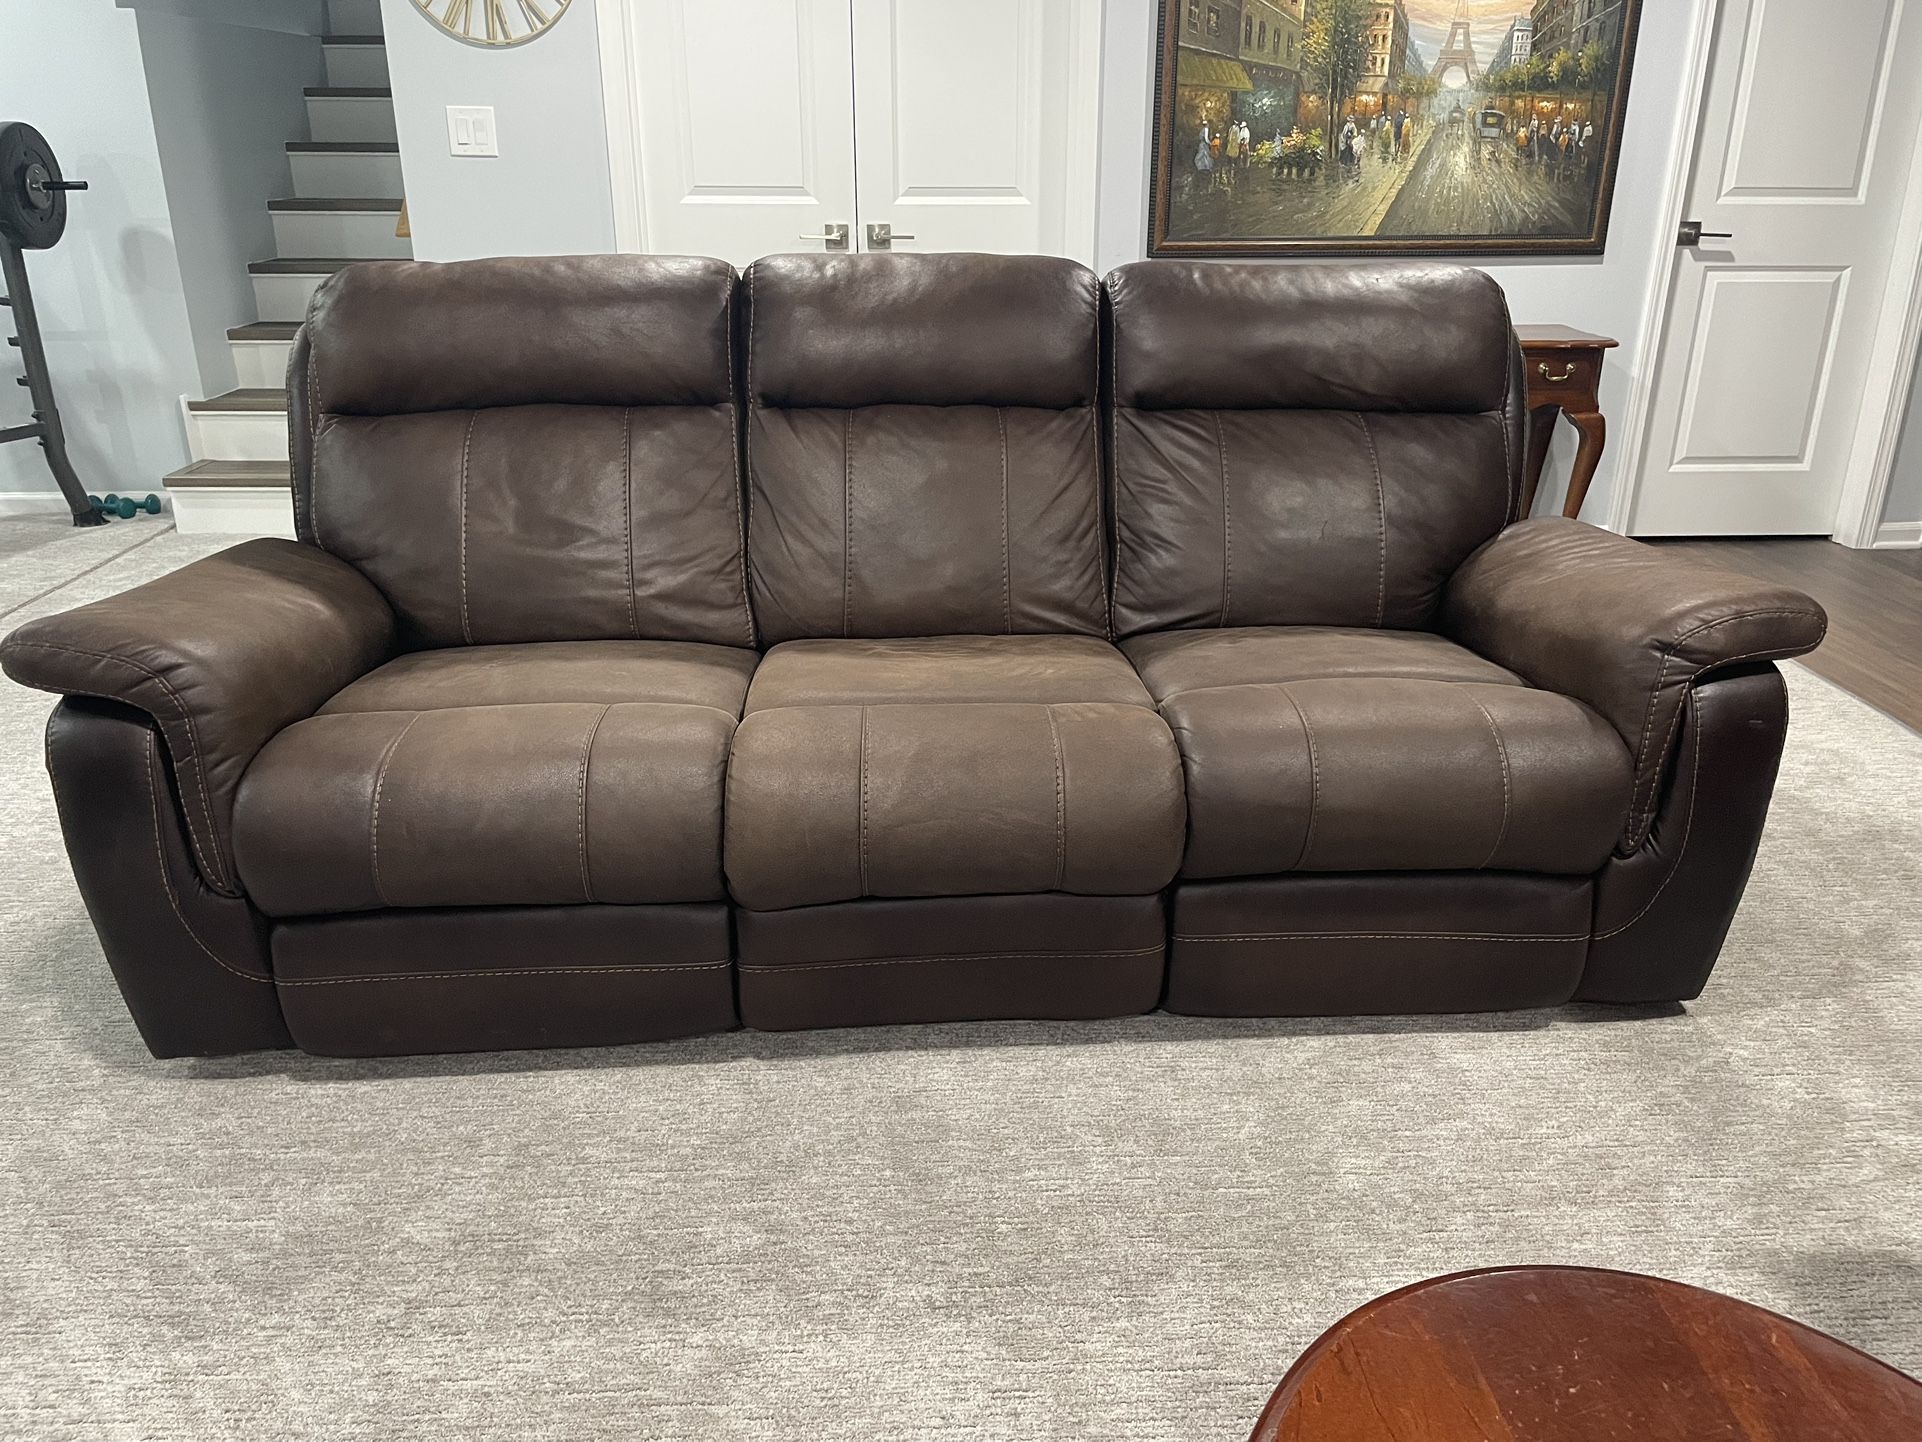 Reclining Sofa For sale $265 Or Best offer